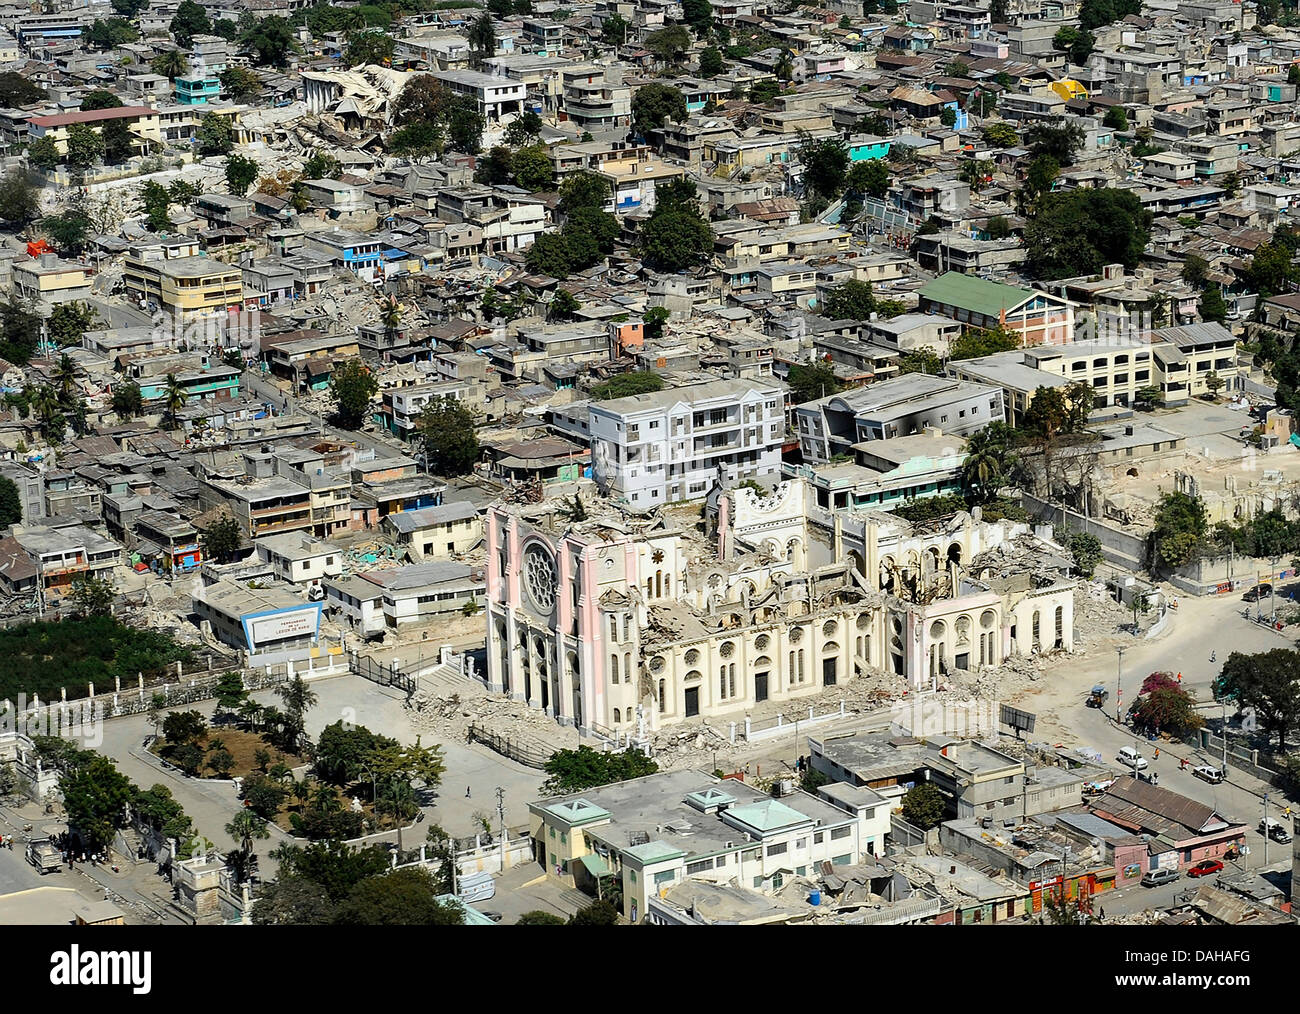 Aerial view of the Cathedral of Our Lady of the Assumption destroyed in the 7.0 magnitude earthquake that killed 220,000 people January 28, 2010 in Port-au-Prince, Haiti. Stock Photo